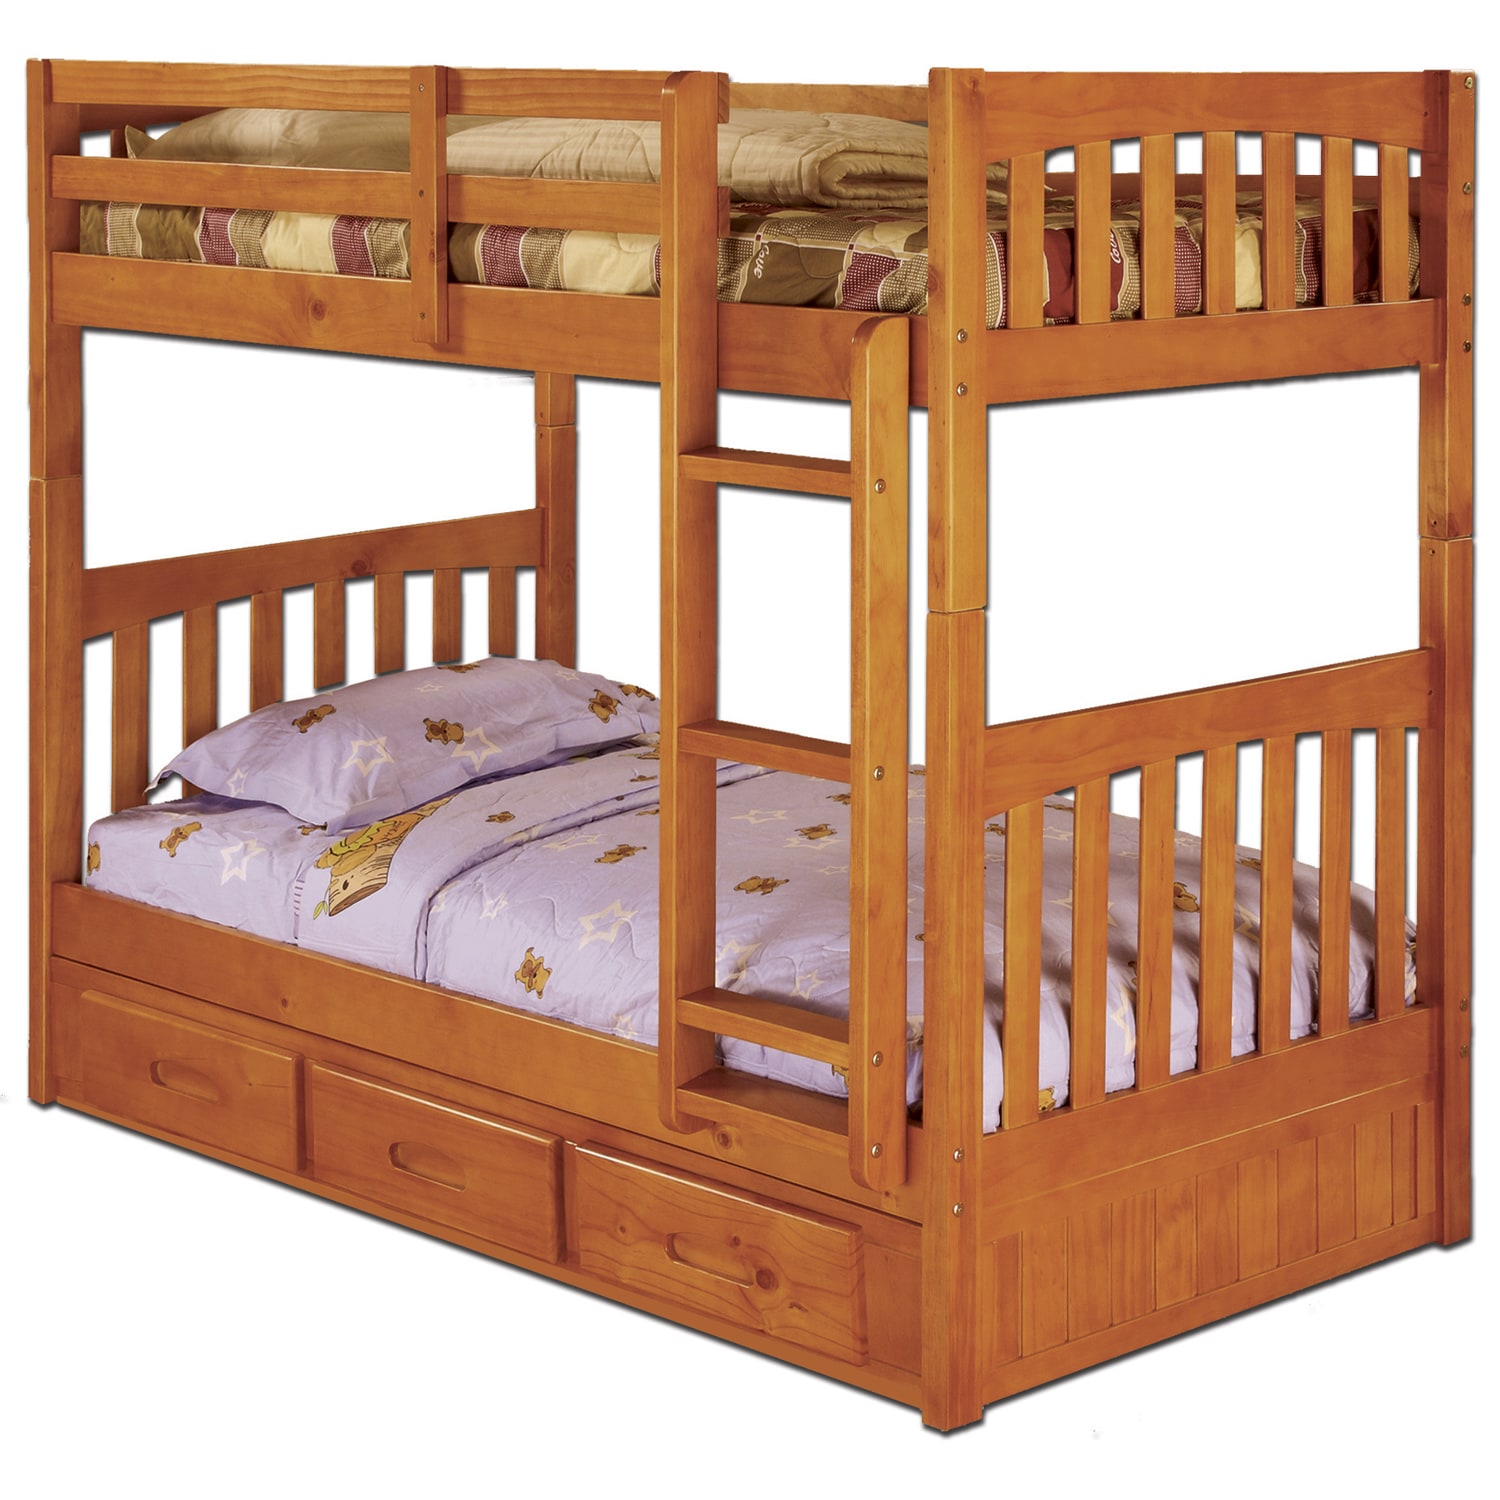 3 twin bunk bed